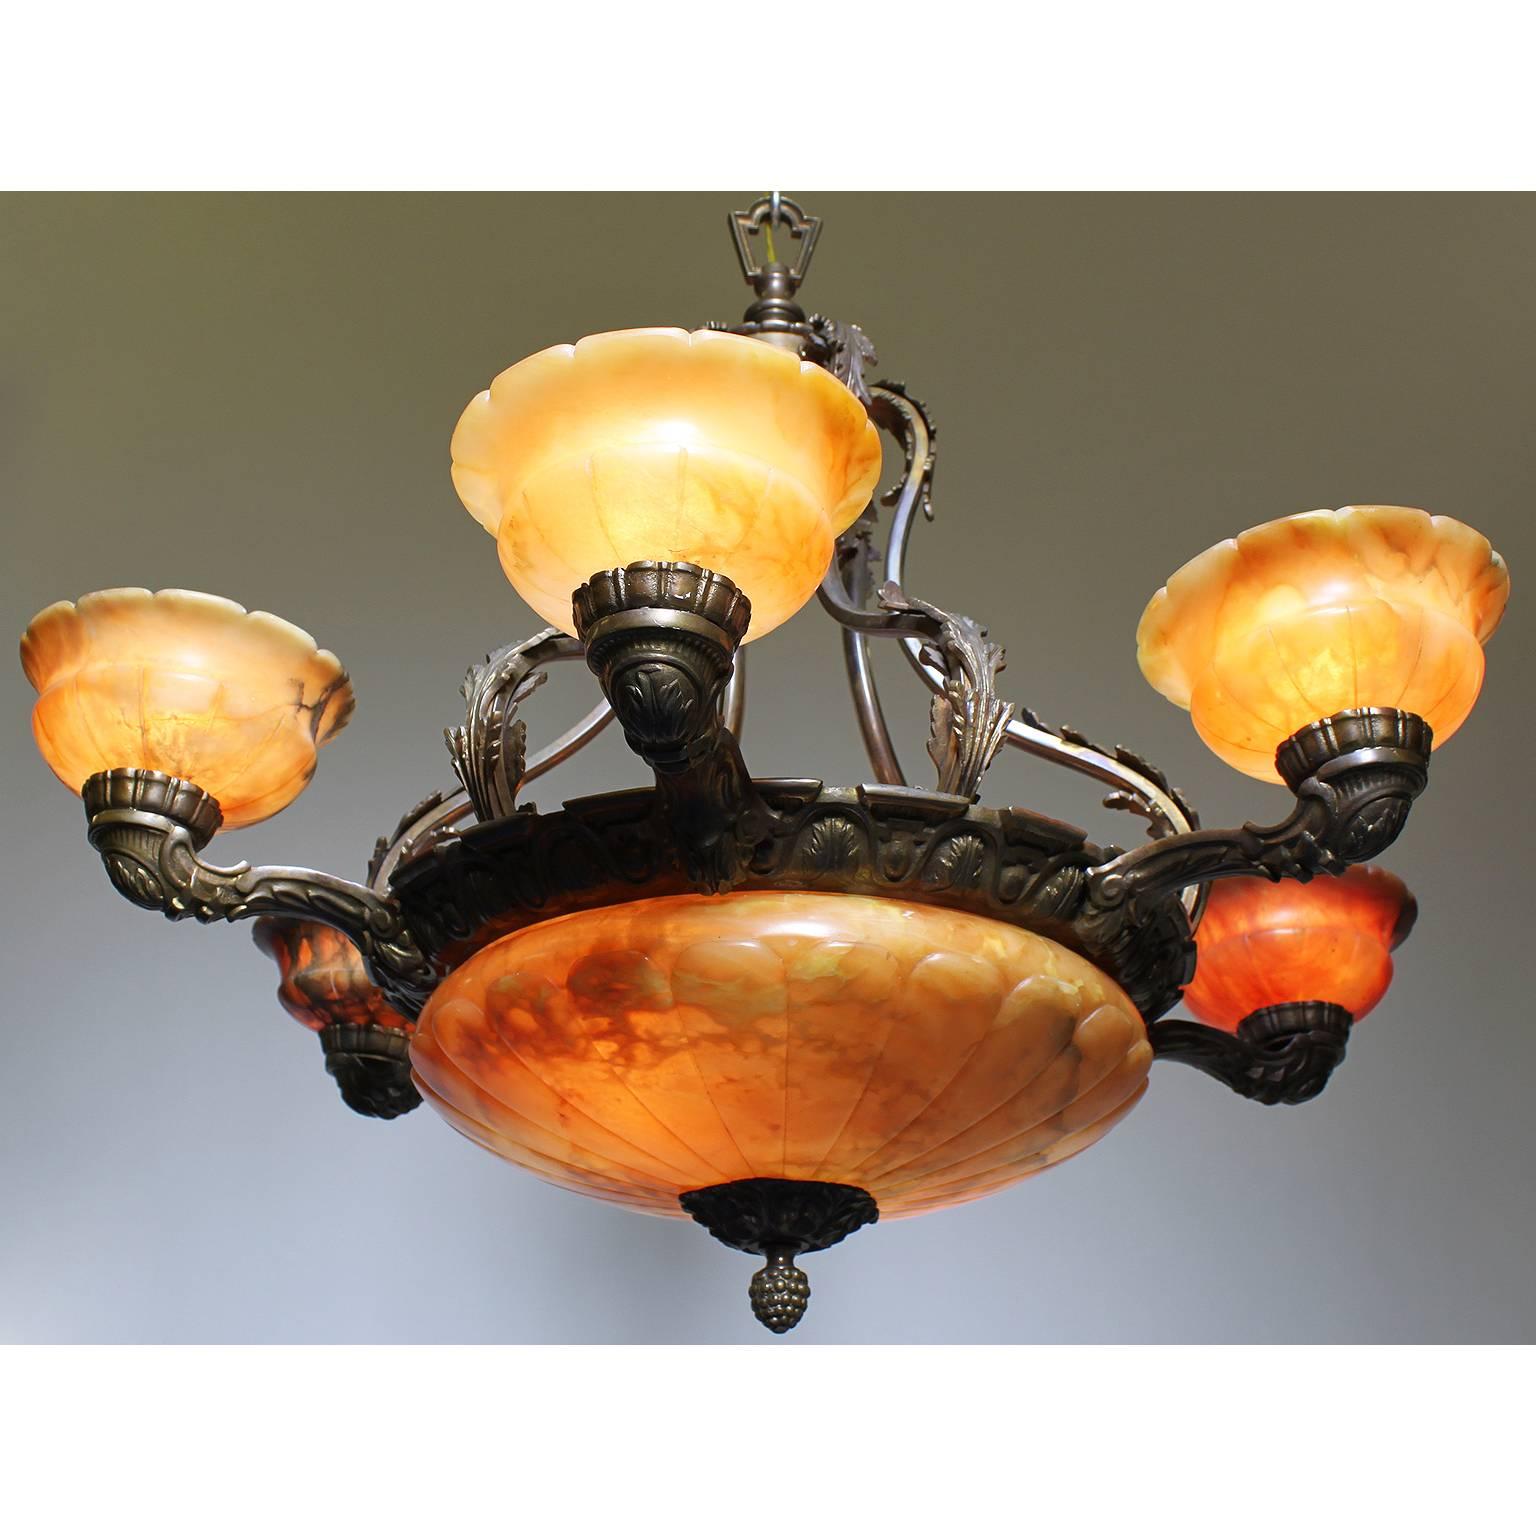 A French 20th century Art Deco and bronze carved veined caramel-colored alabaster six-light chandelier. The carved circular alabaster plafonnier with a floral apron and banded frame with six alabaster lights supported by cornucopia shaped bronze